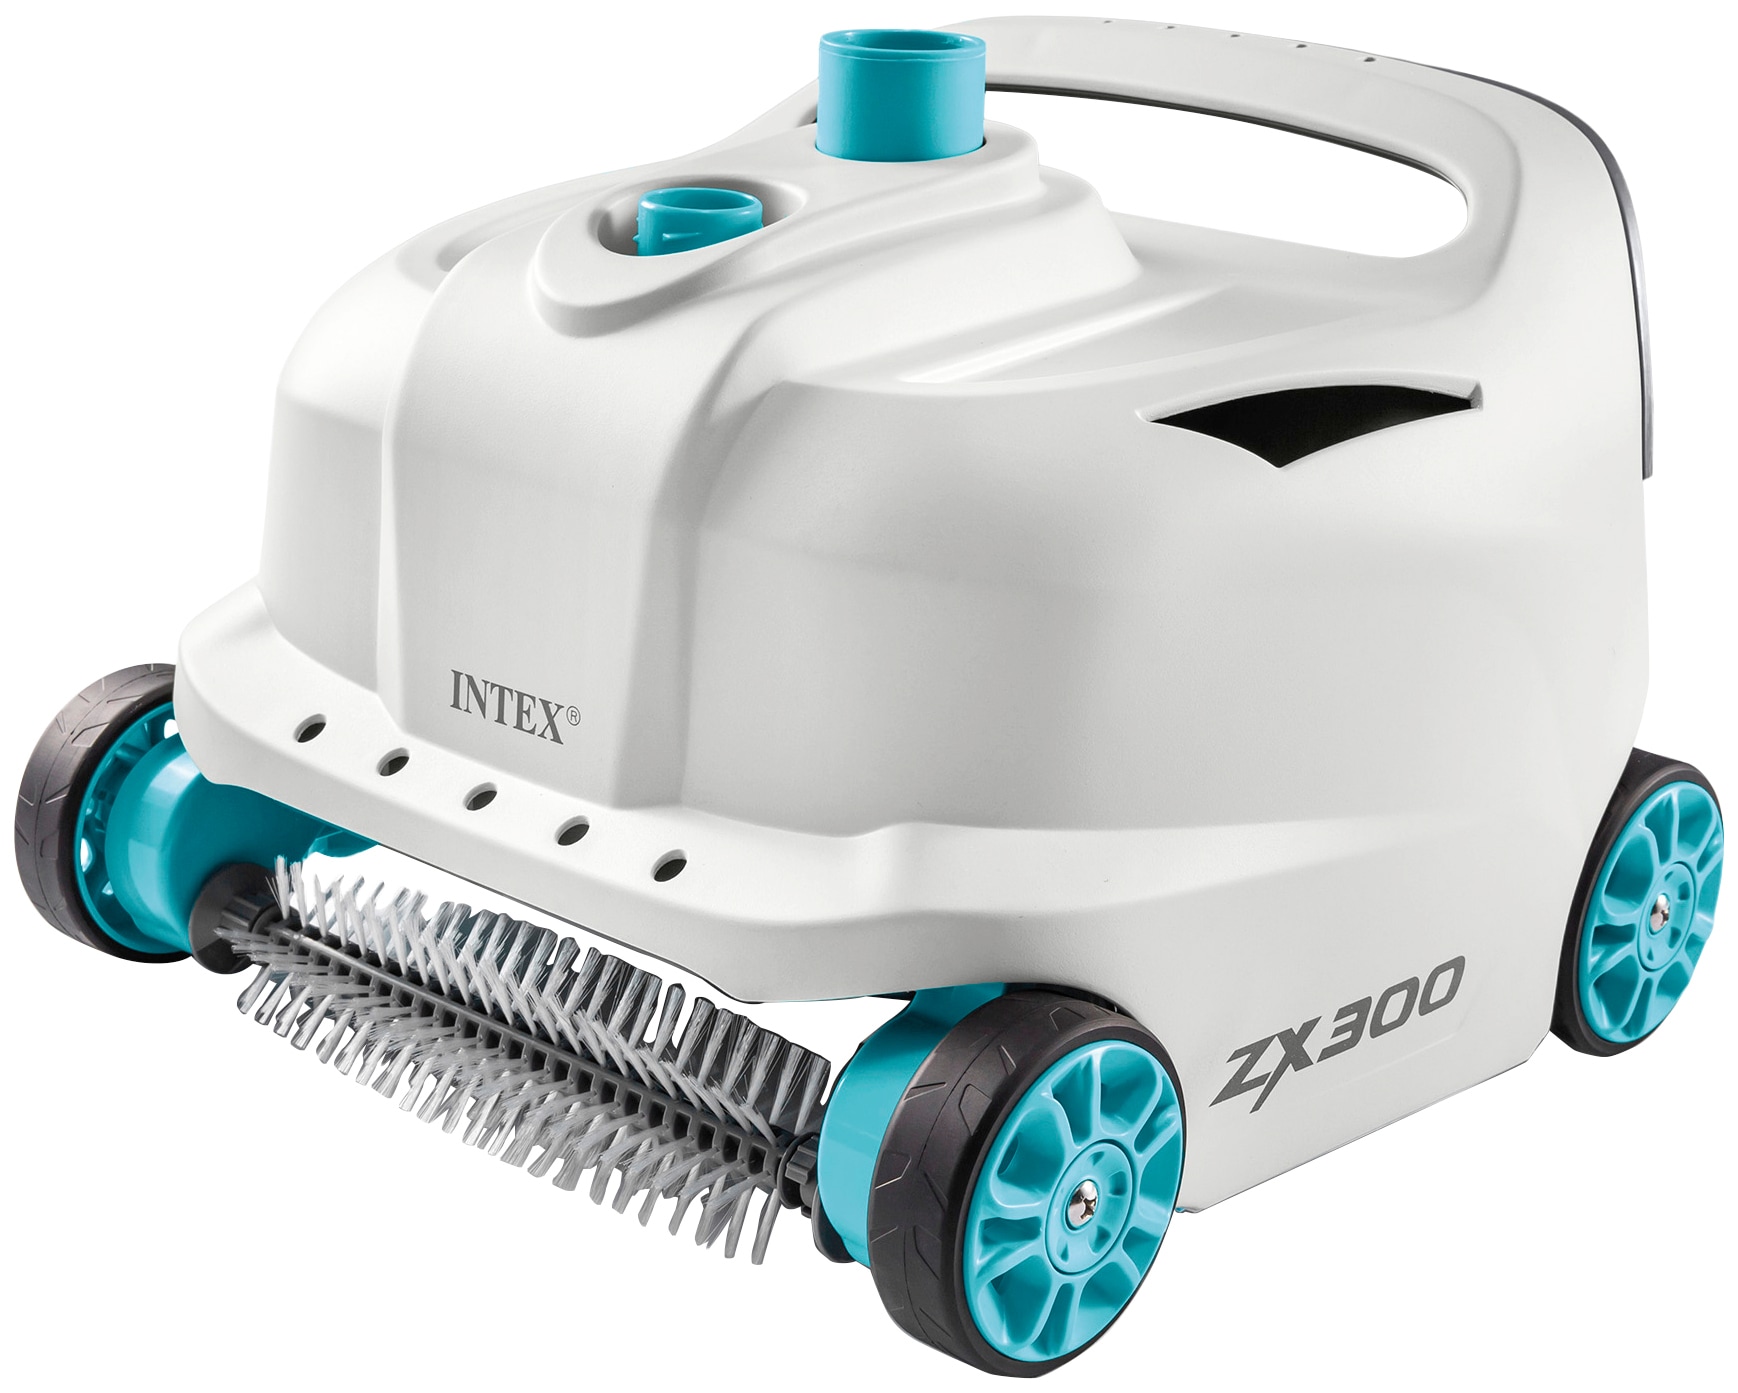 Intex Poolbodensauger »Pool-Cleaner Deluxe ZX300«, inkl. Schlauch